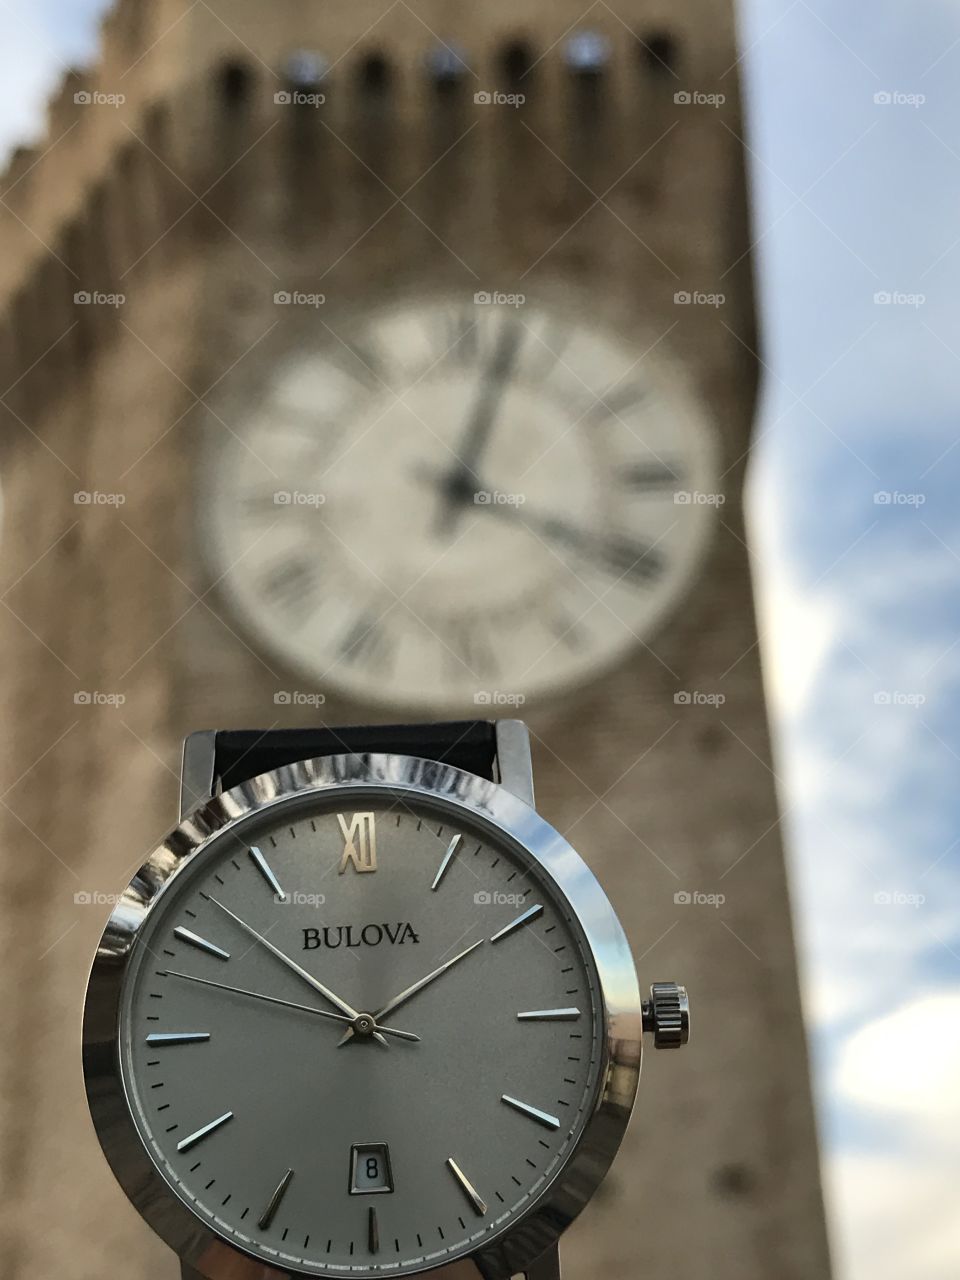 Bulova watch with historical clock tower behind 